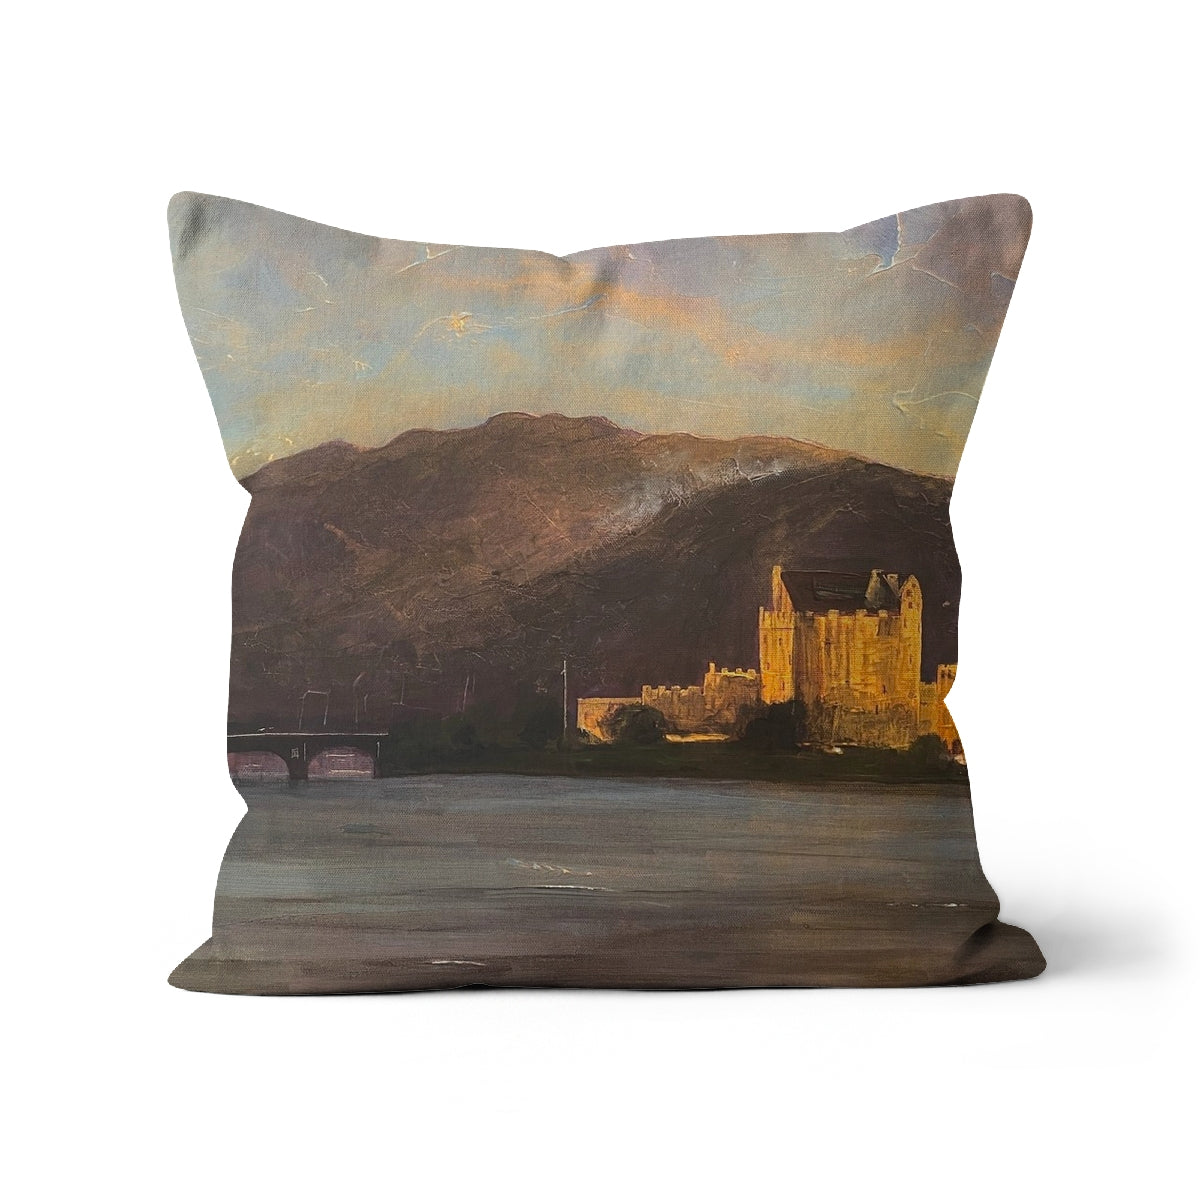 Eilean Donan Castle Art Gifts Cushion-Cushions-Historic & Iconic Scotland Art Gallery-Linen-24"x24"-Paintings, Prints, Homeware, Art Gifts From Scotland By Scottish Artist Kevin Hunter